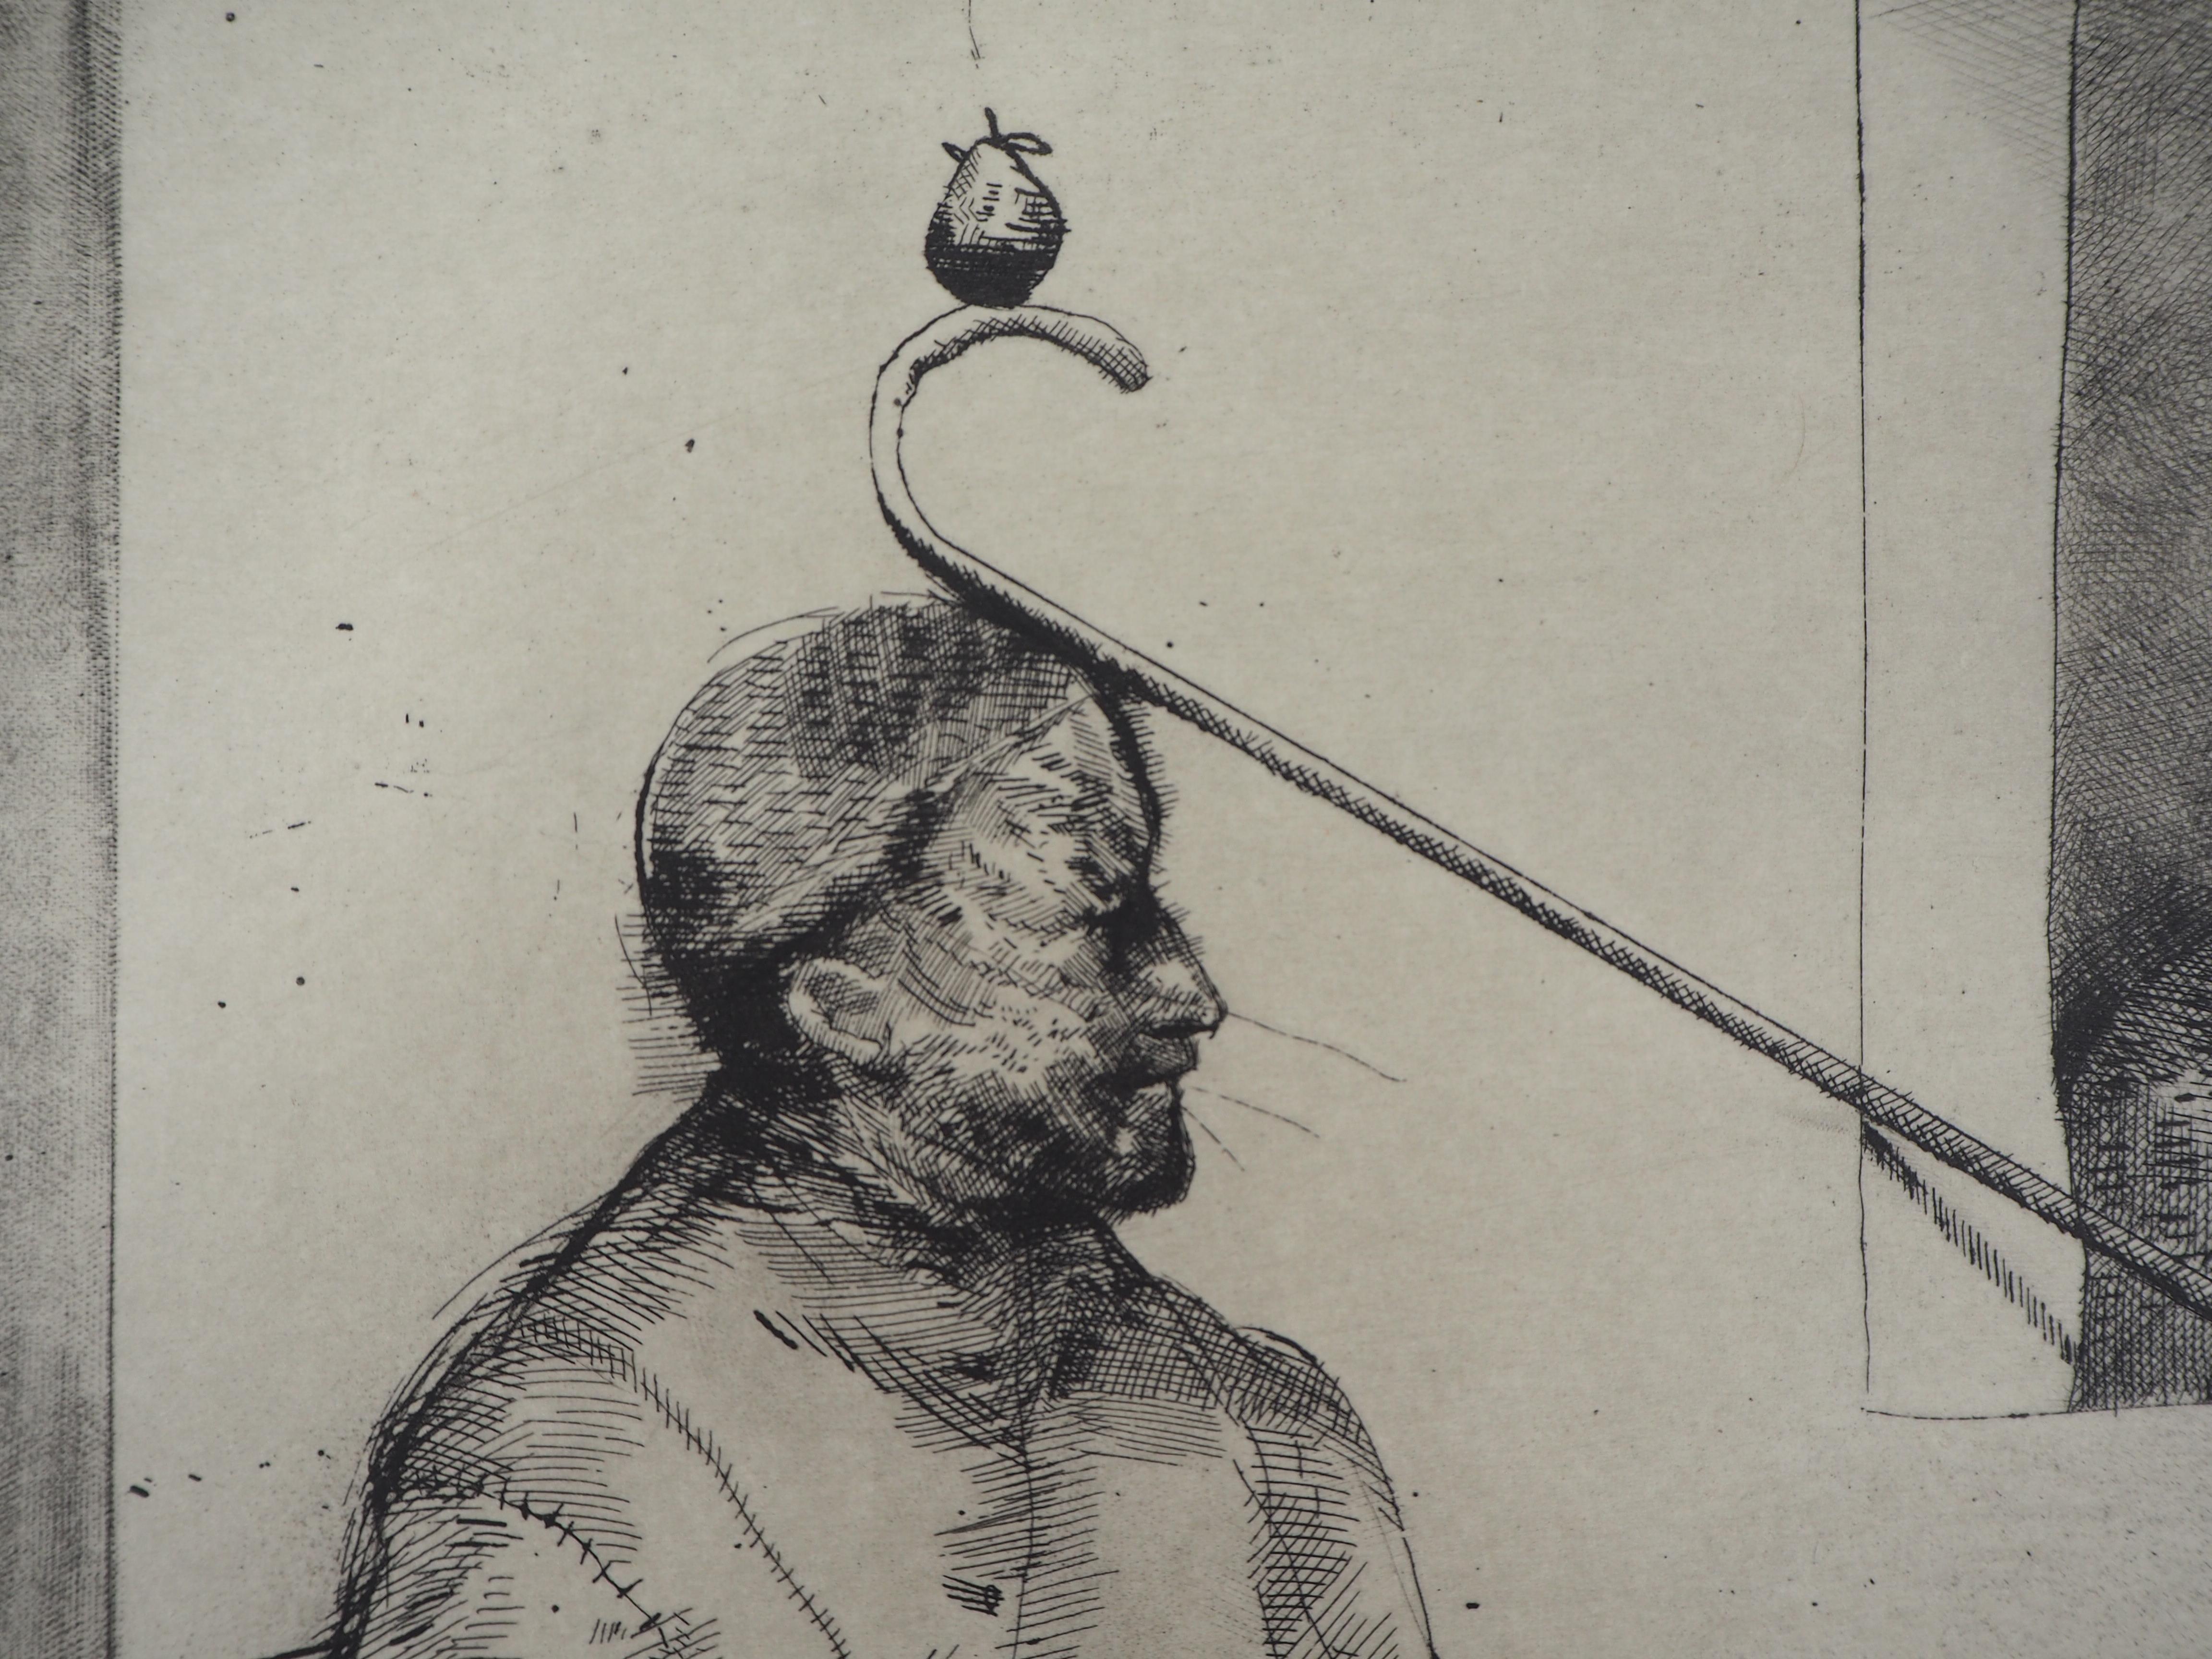 The Balance of Pear - Original handsigned etching, Limited / 100 - Gray Figurative Print by Miguel Conde